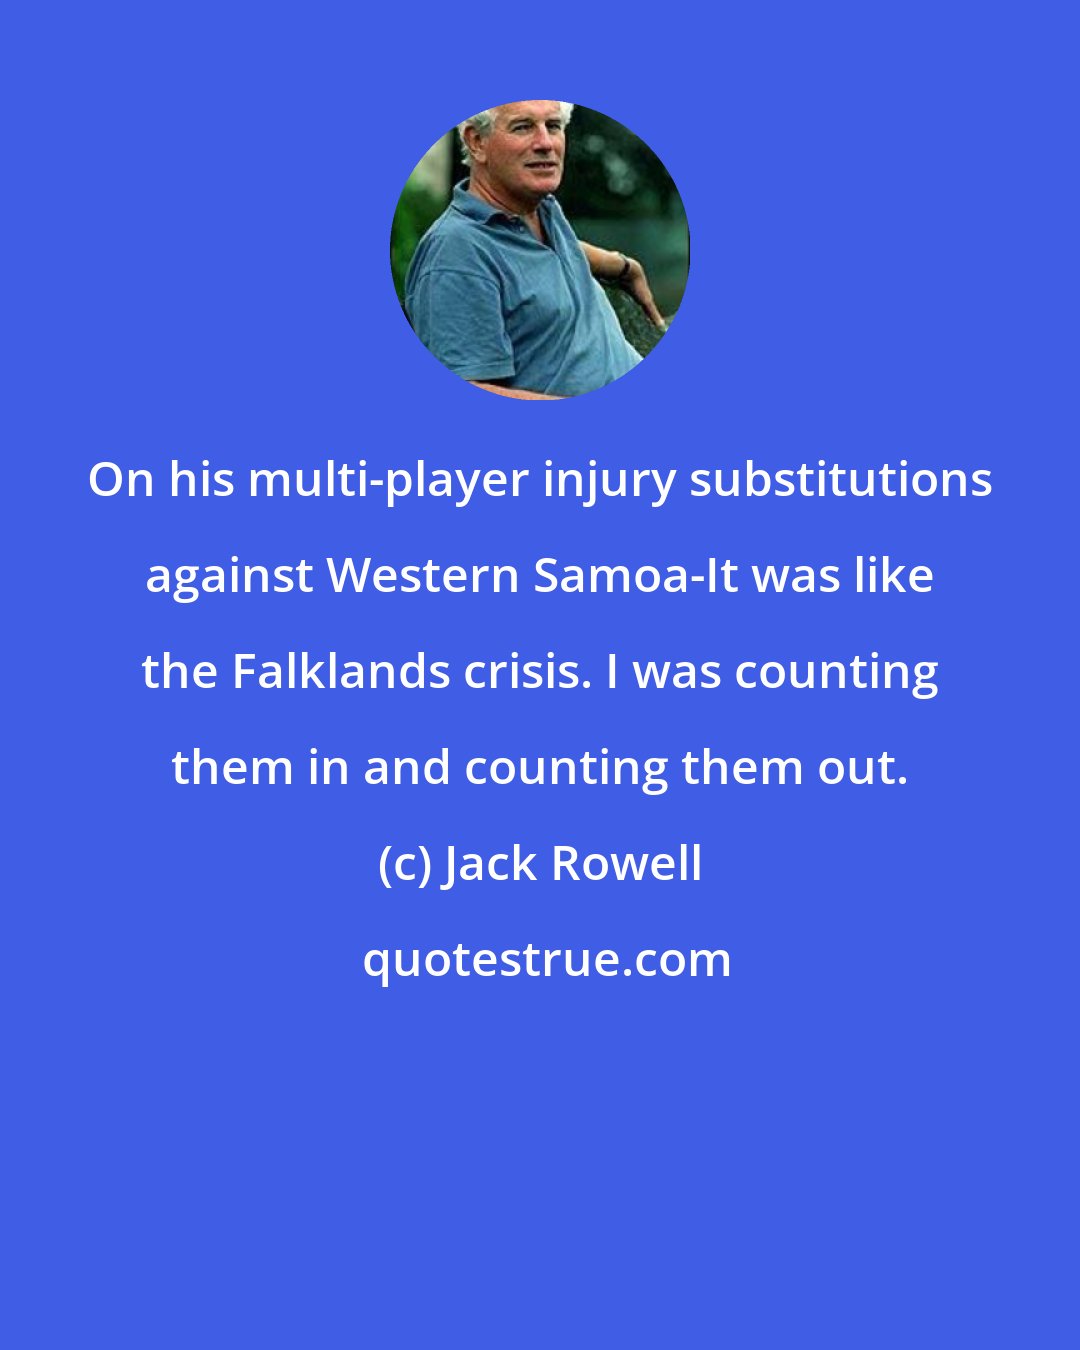 Jack Rowell: On his multi-player injury substitutions against Western Samoa-It was like the Falklands crisis. I was counting them in and counting them out.